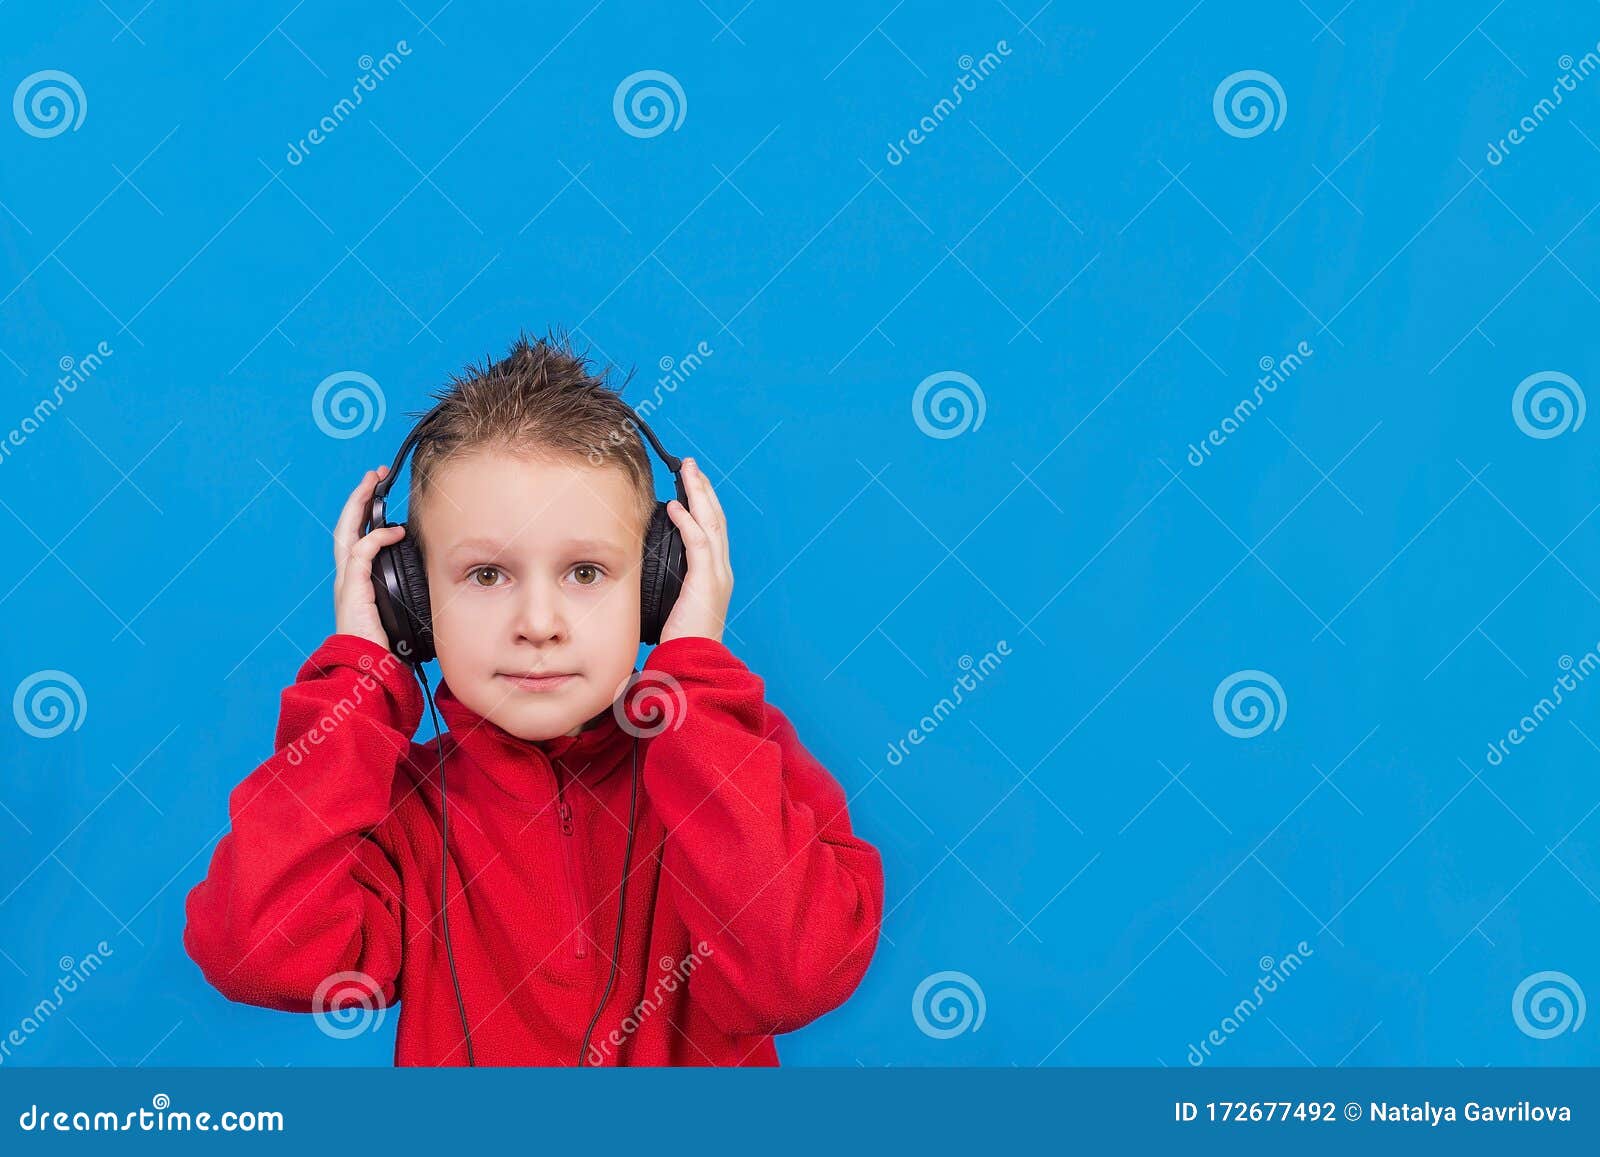 Blue-haired boy with headphones - wide 4